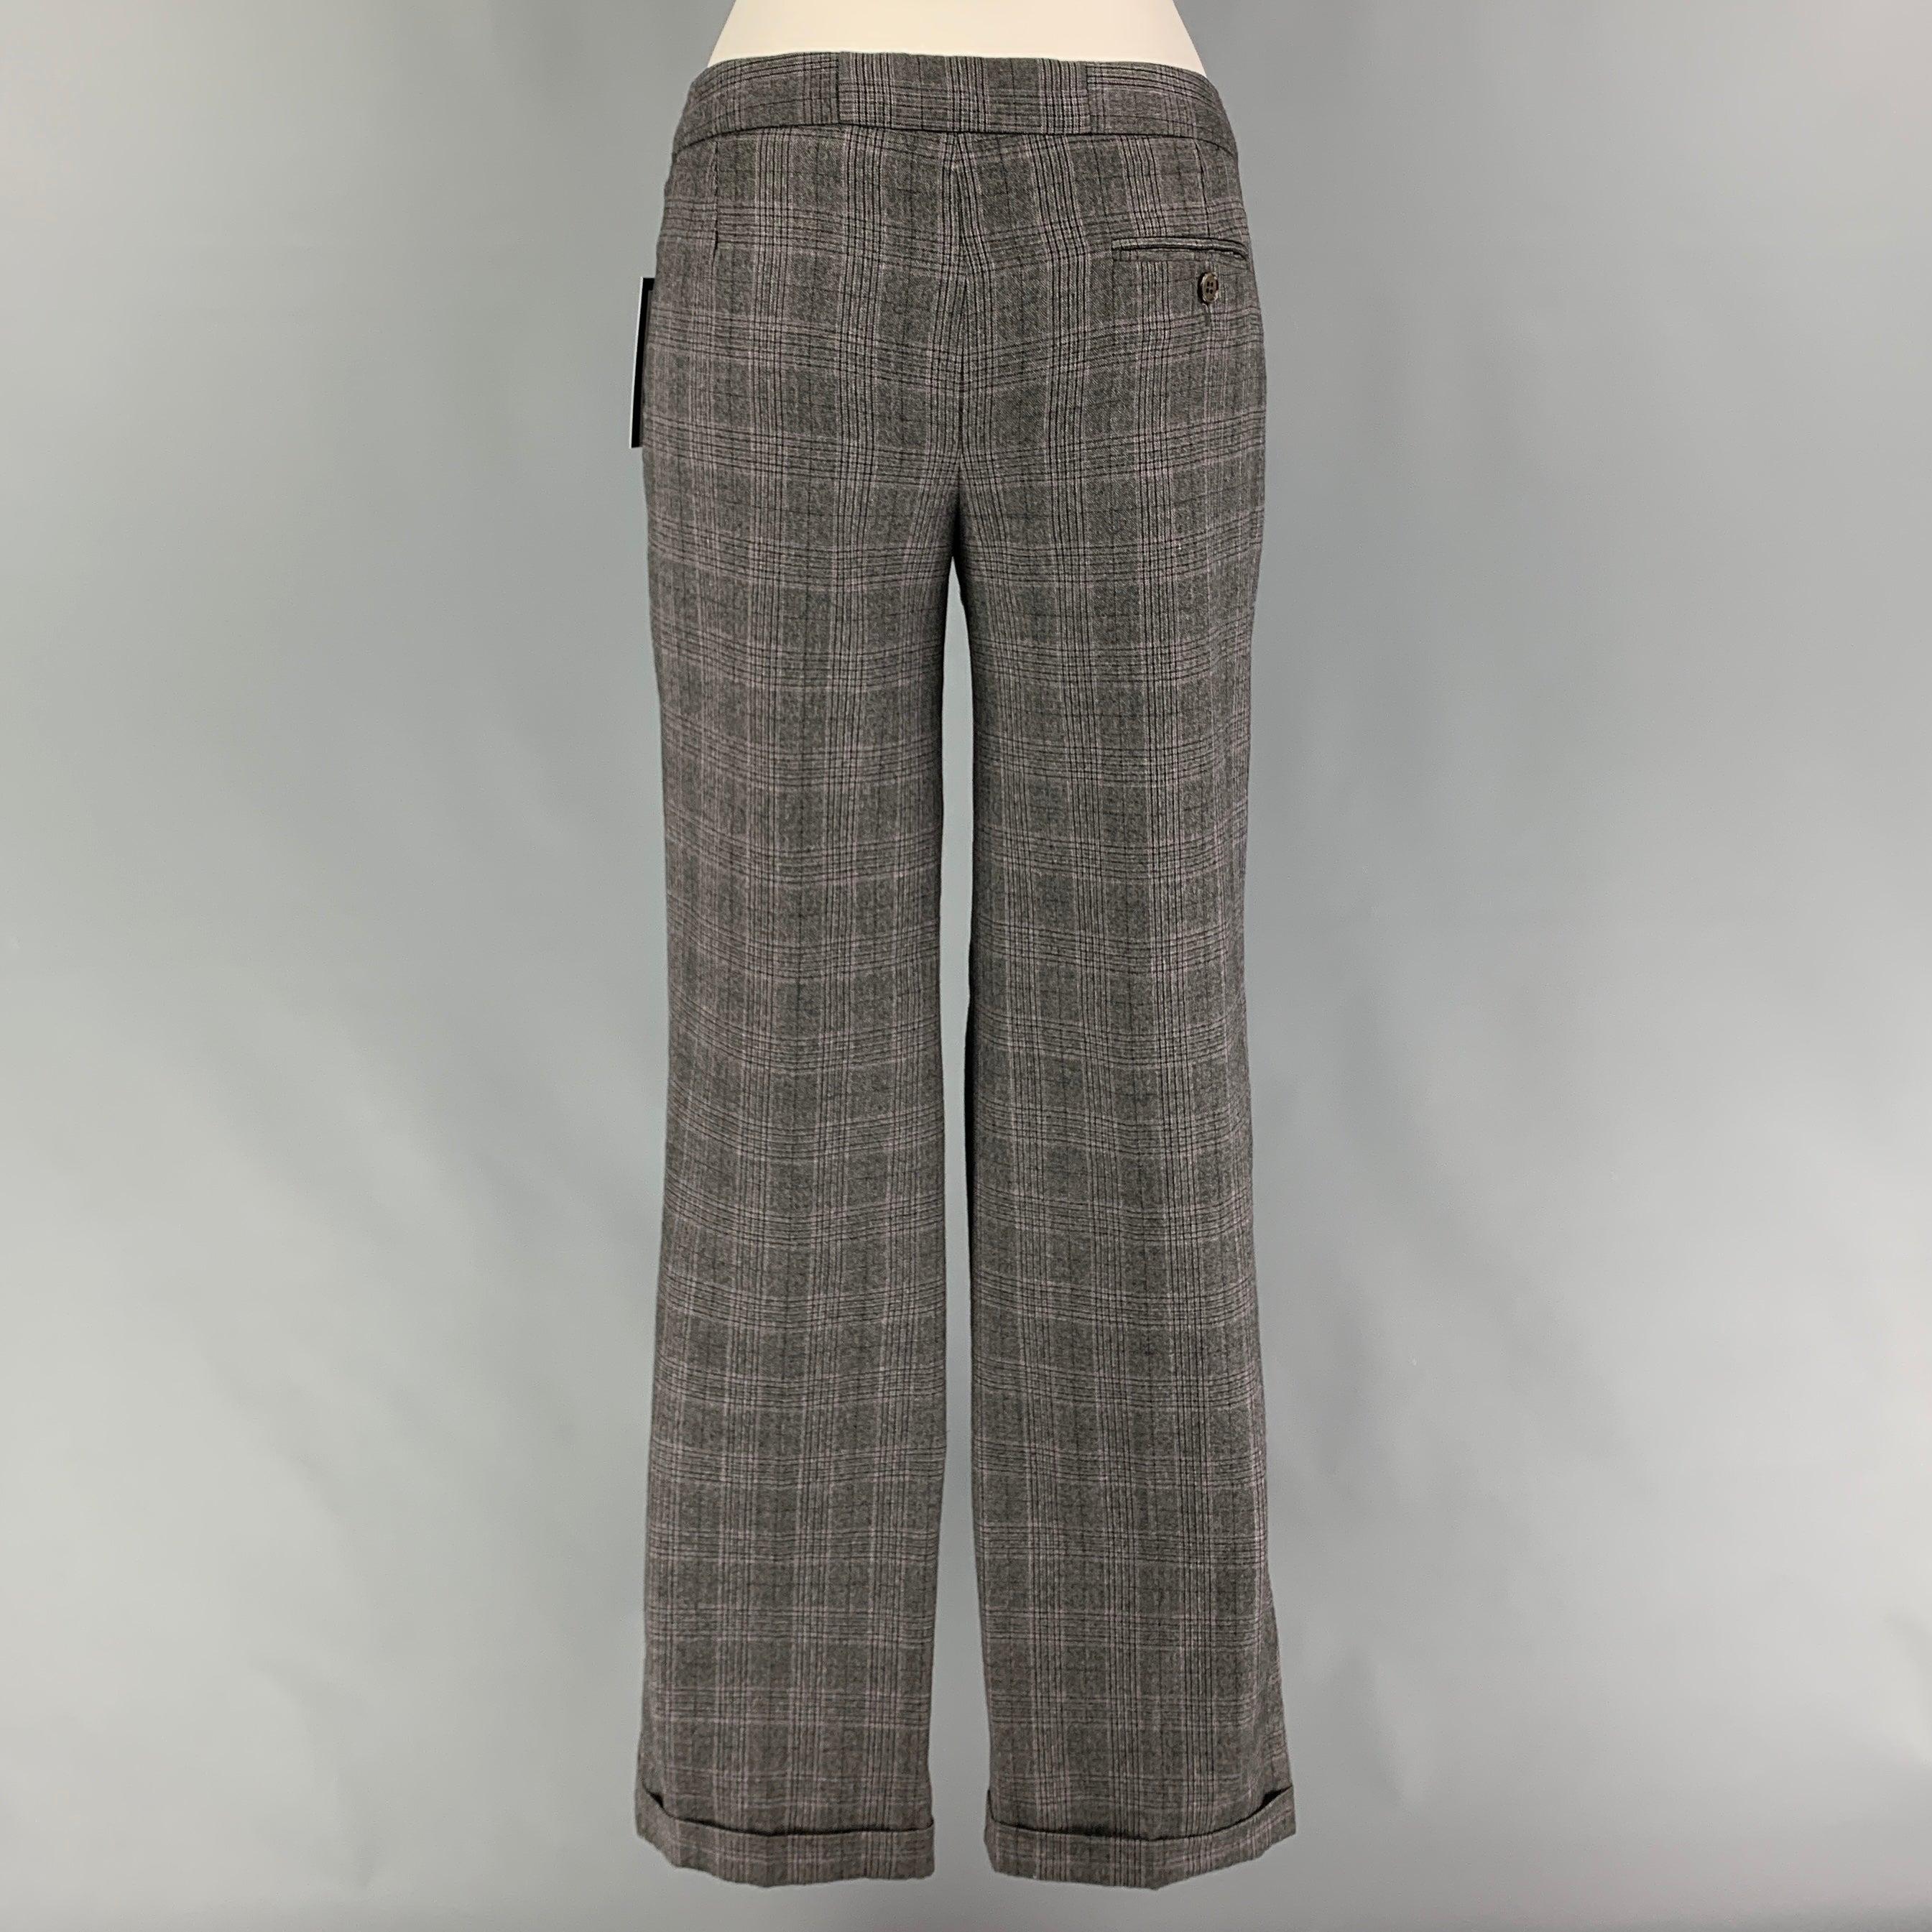 2009 by ALEXANDER McQUEEN dress pants comes in a grey virgin wool featuring a flat front, cuffed leg, and a zip fly closure. Made in Italy.
Very Good
Pre-Owned Condition. Pants have been professionally altered. Small mark at back left leg. As-Is. 